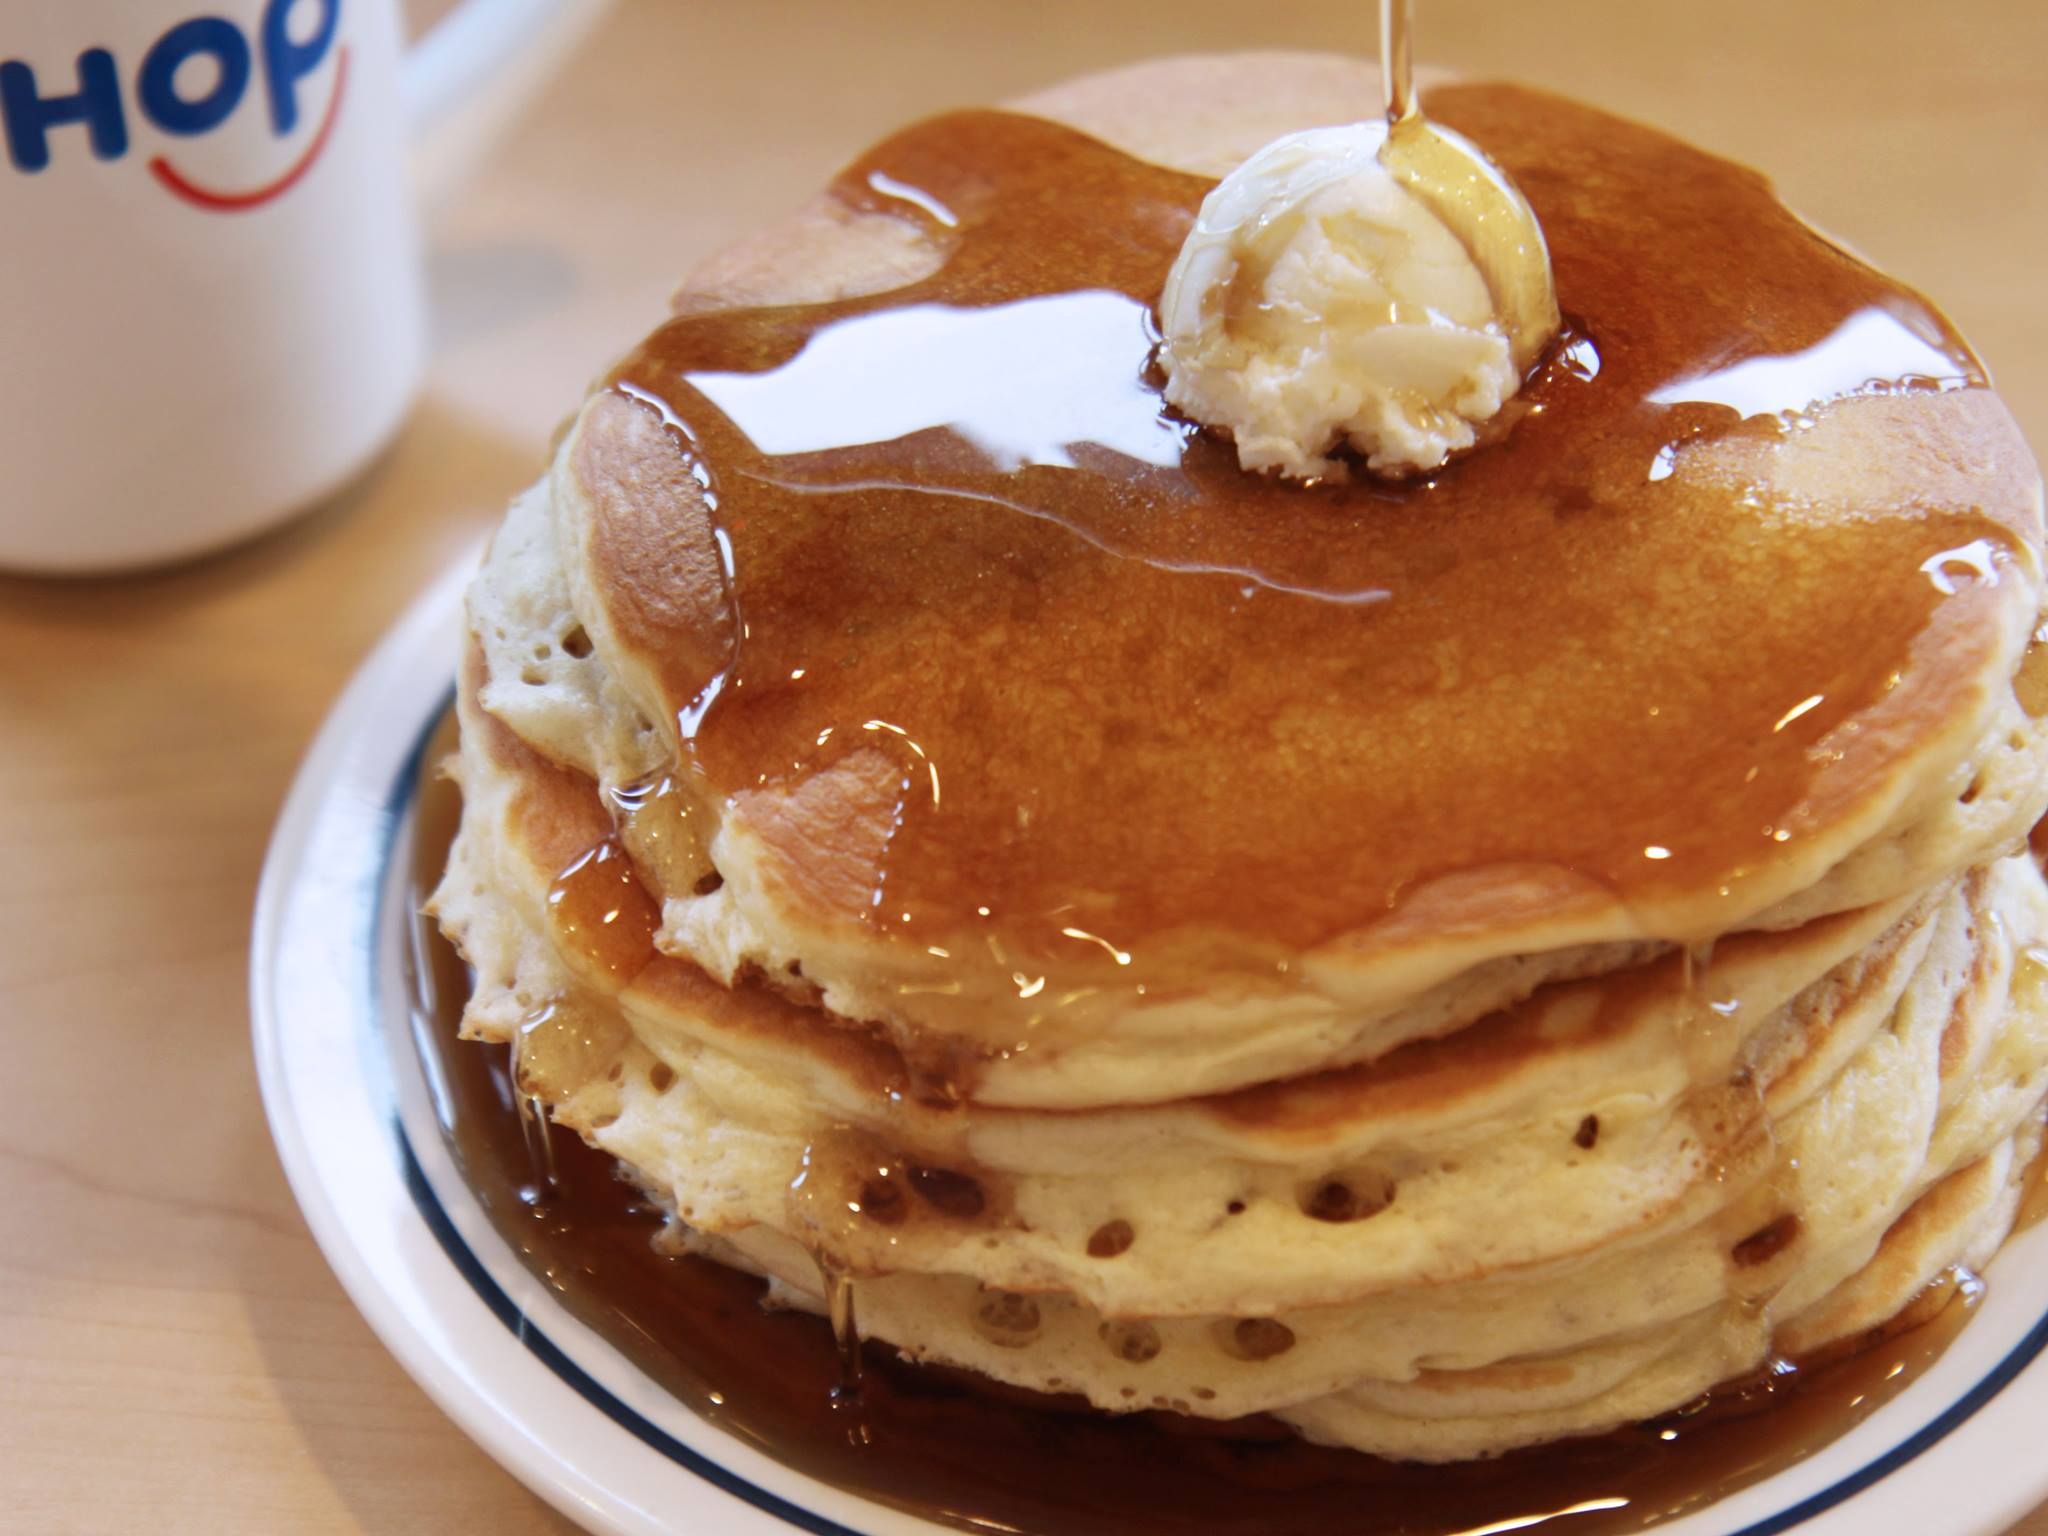 IHOP has a new point-of-sale system for the first time in 15 years